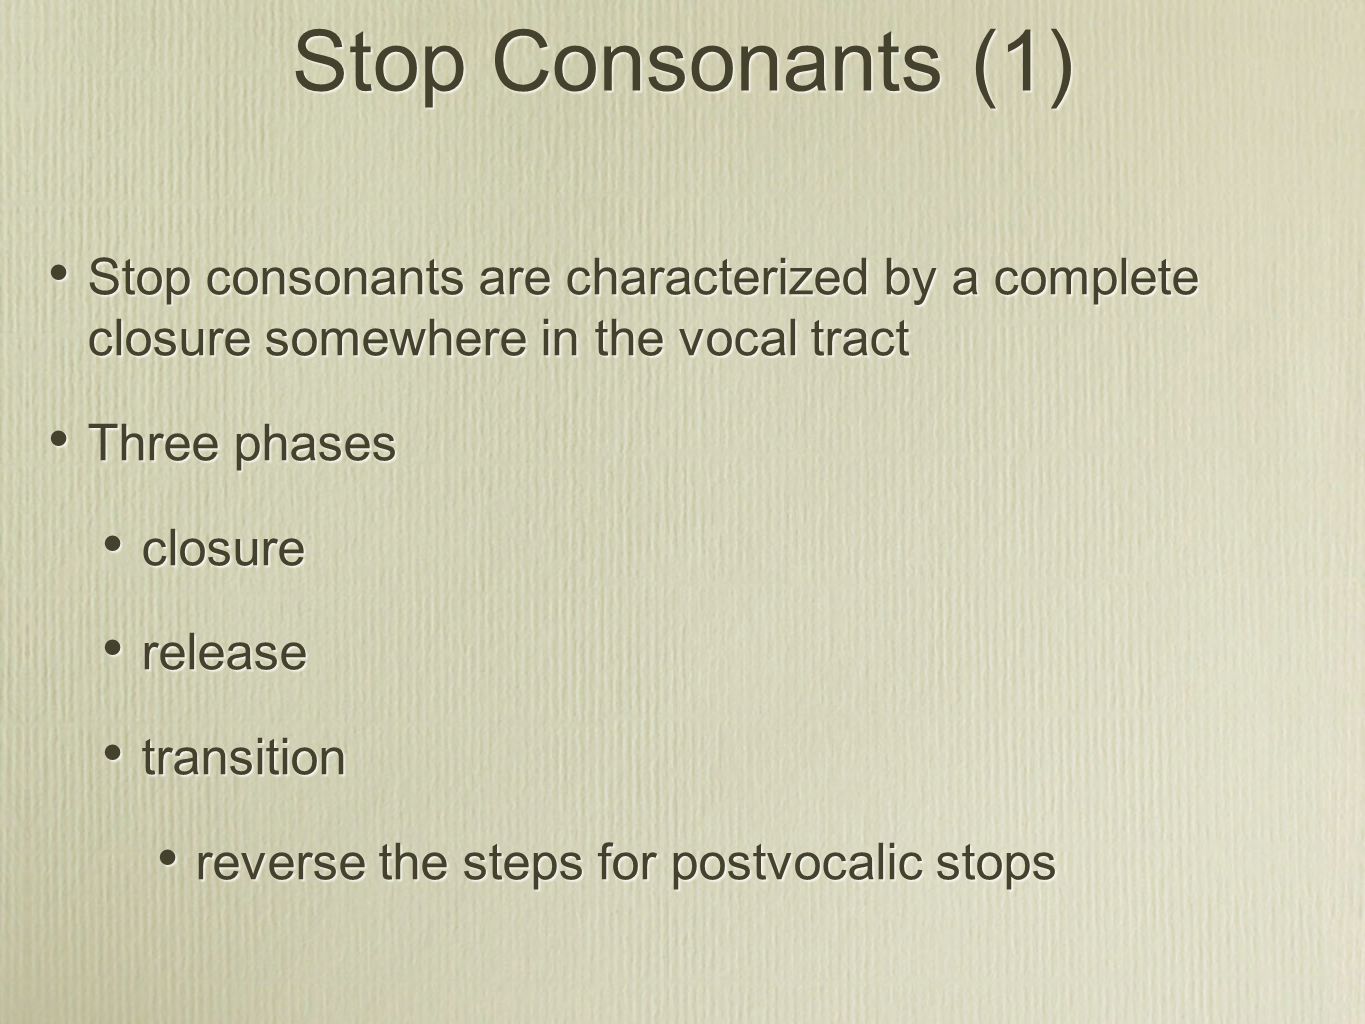 Stop Consonants (1) Stop consonants are characterized by a complete closure somewhere in the vocal tract.